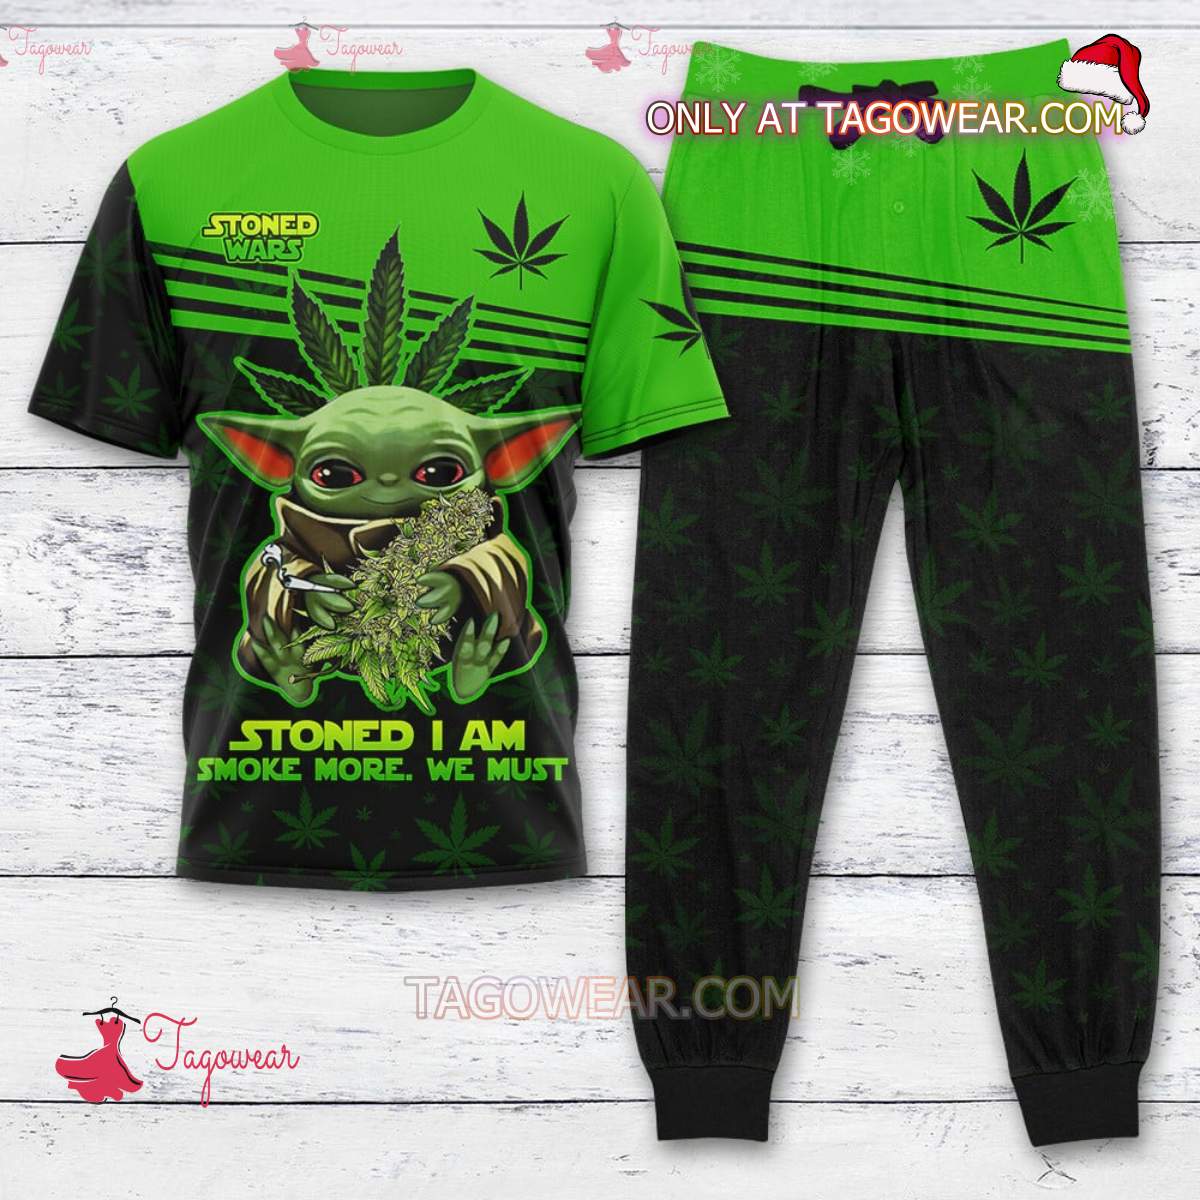 Baby Yoda Stoned Wars Stoned I Am Smoke More We Must T-shirt And Pants